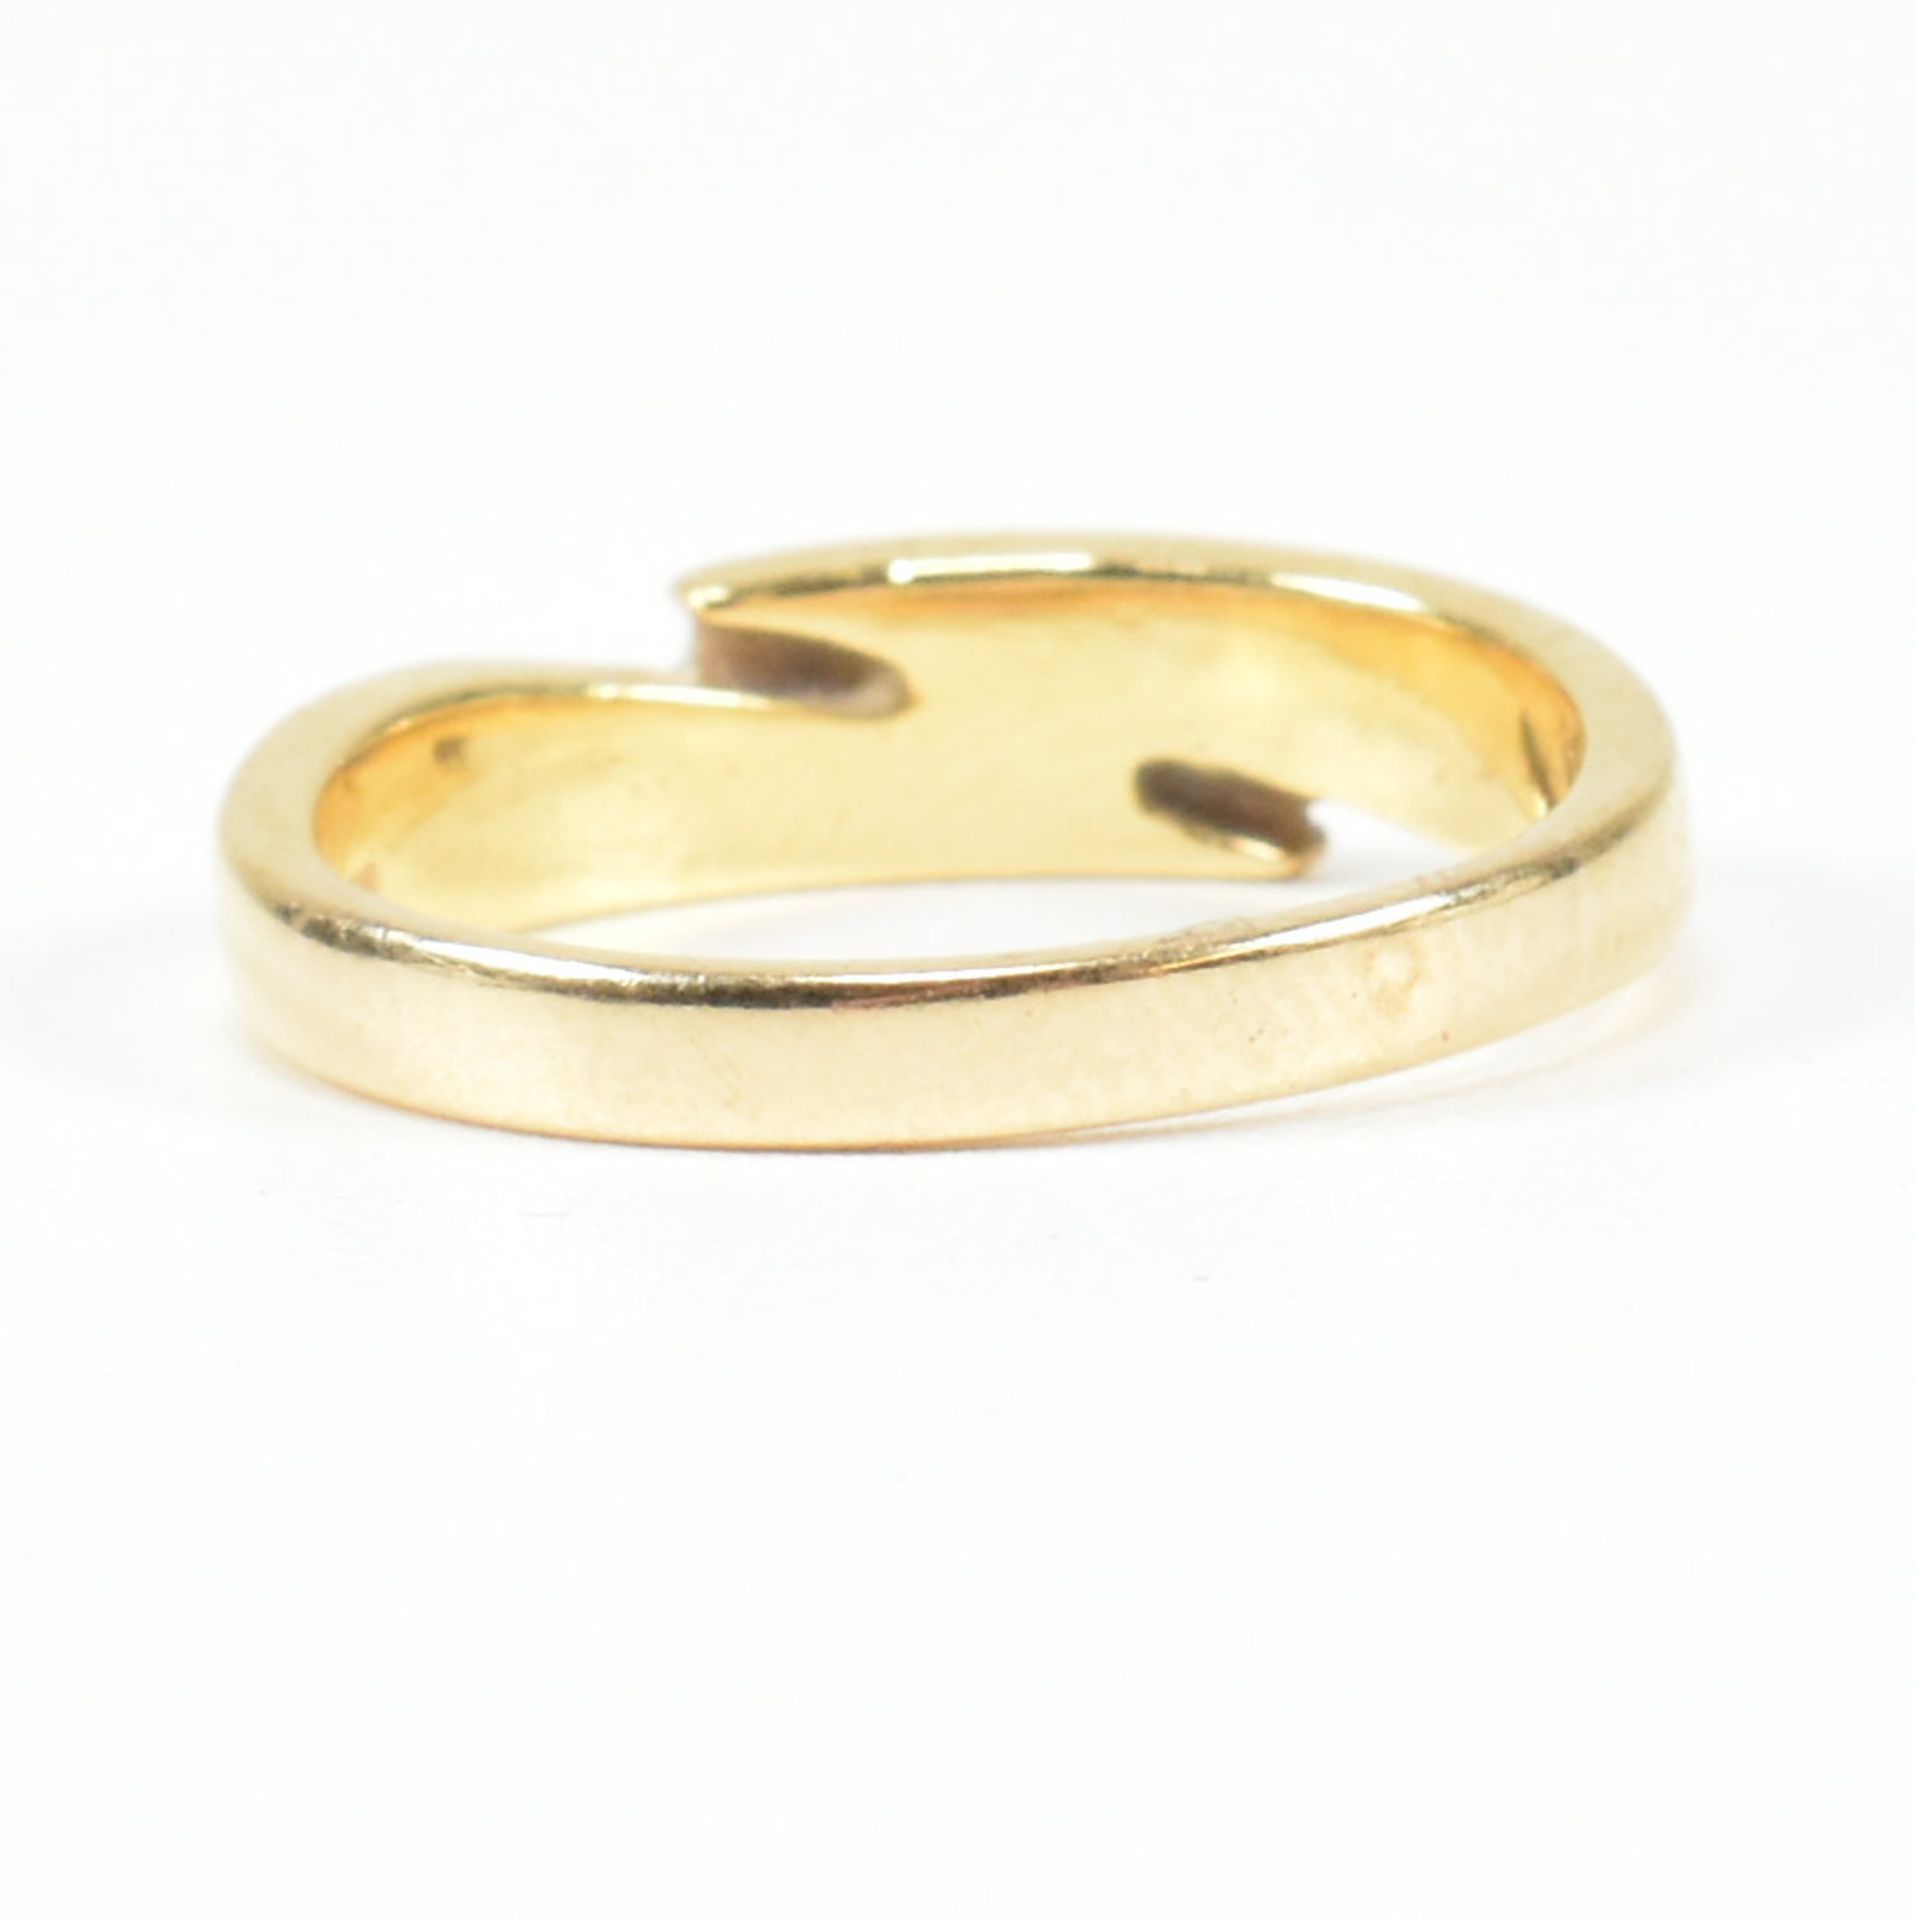 18CT GOLD & DIAMOND CROSSOVER BAND RING - Image 4 of 8